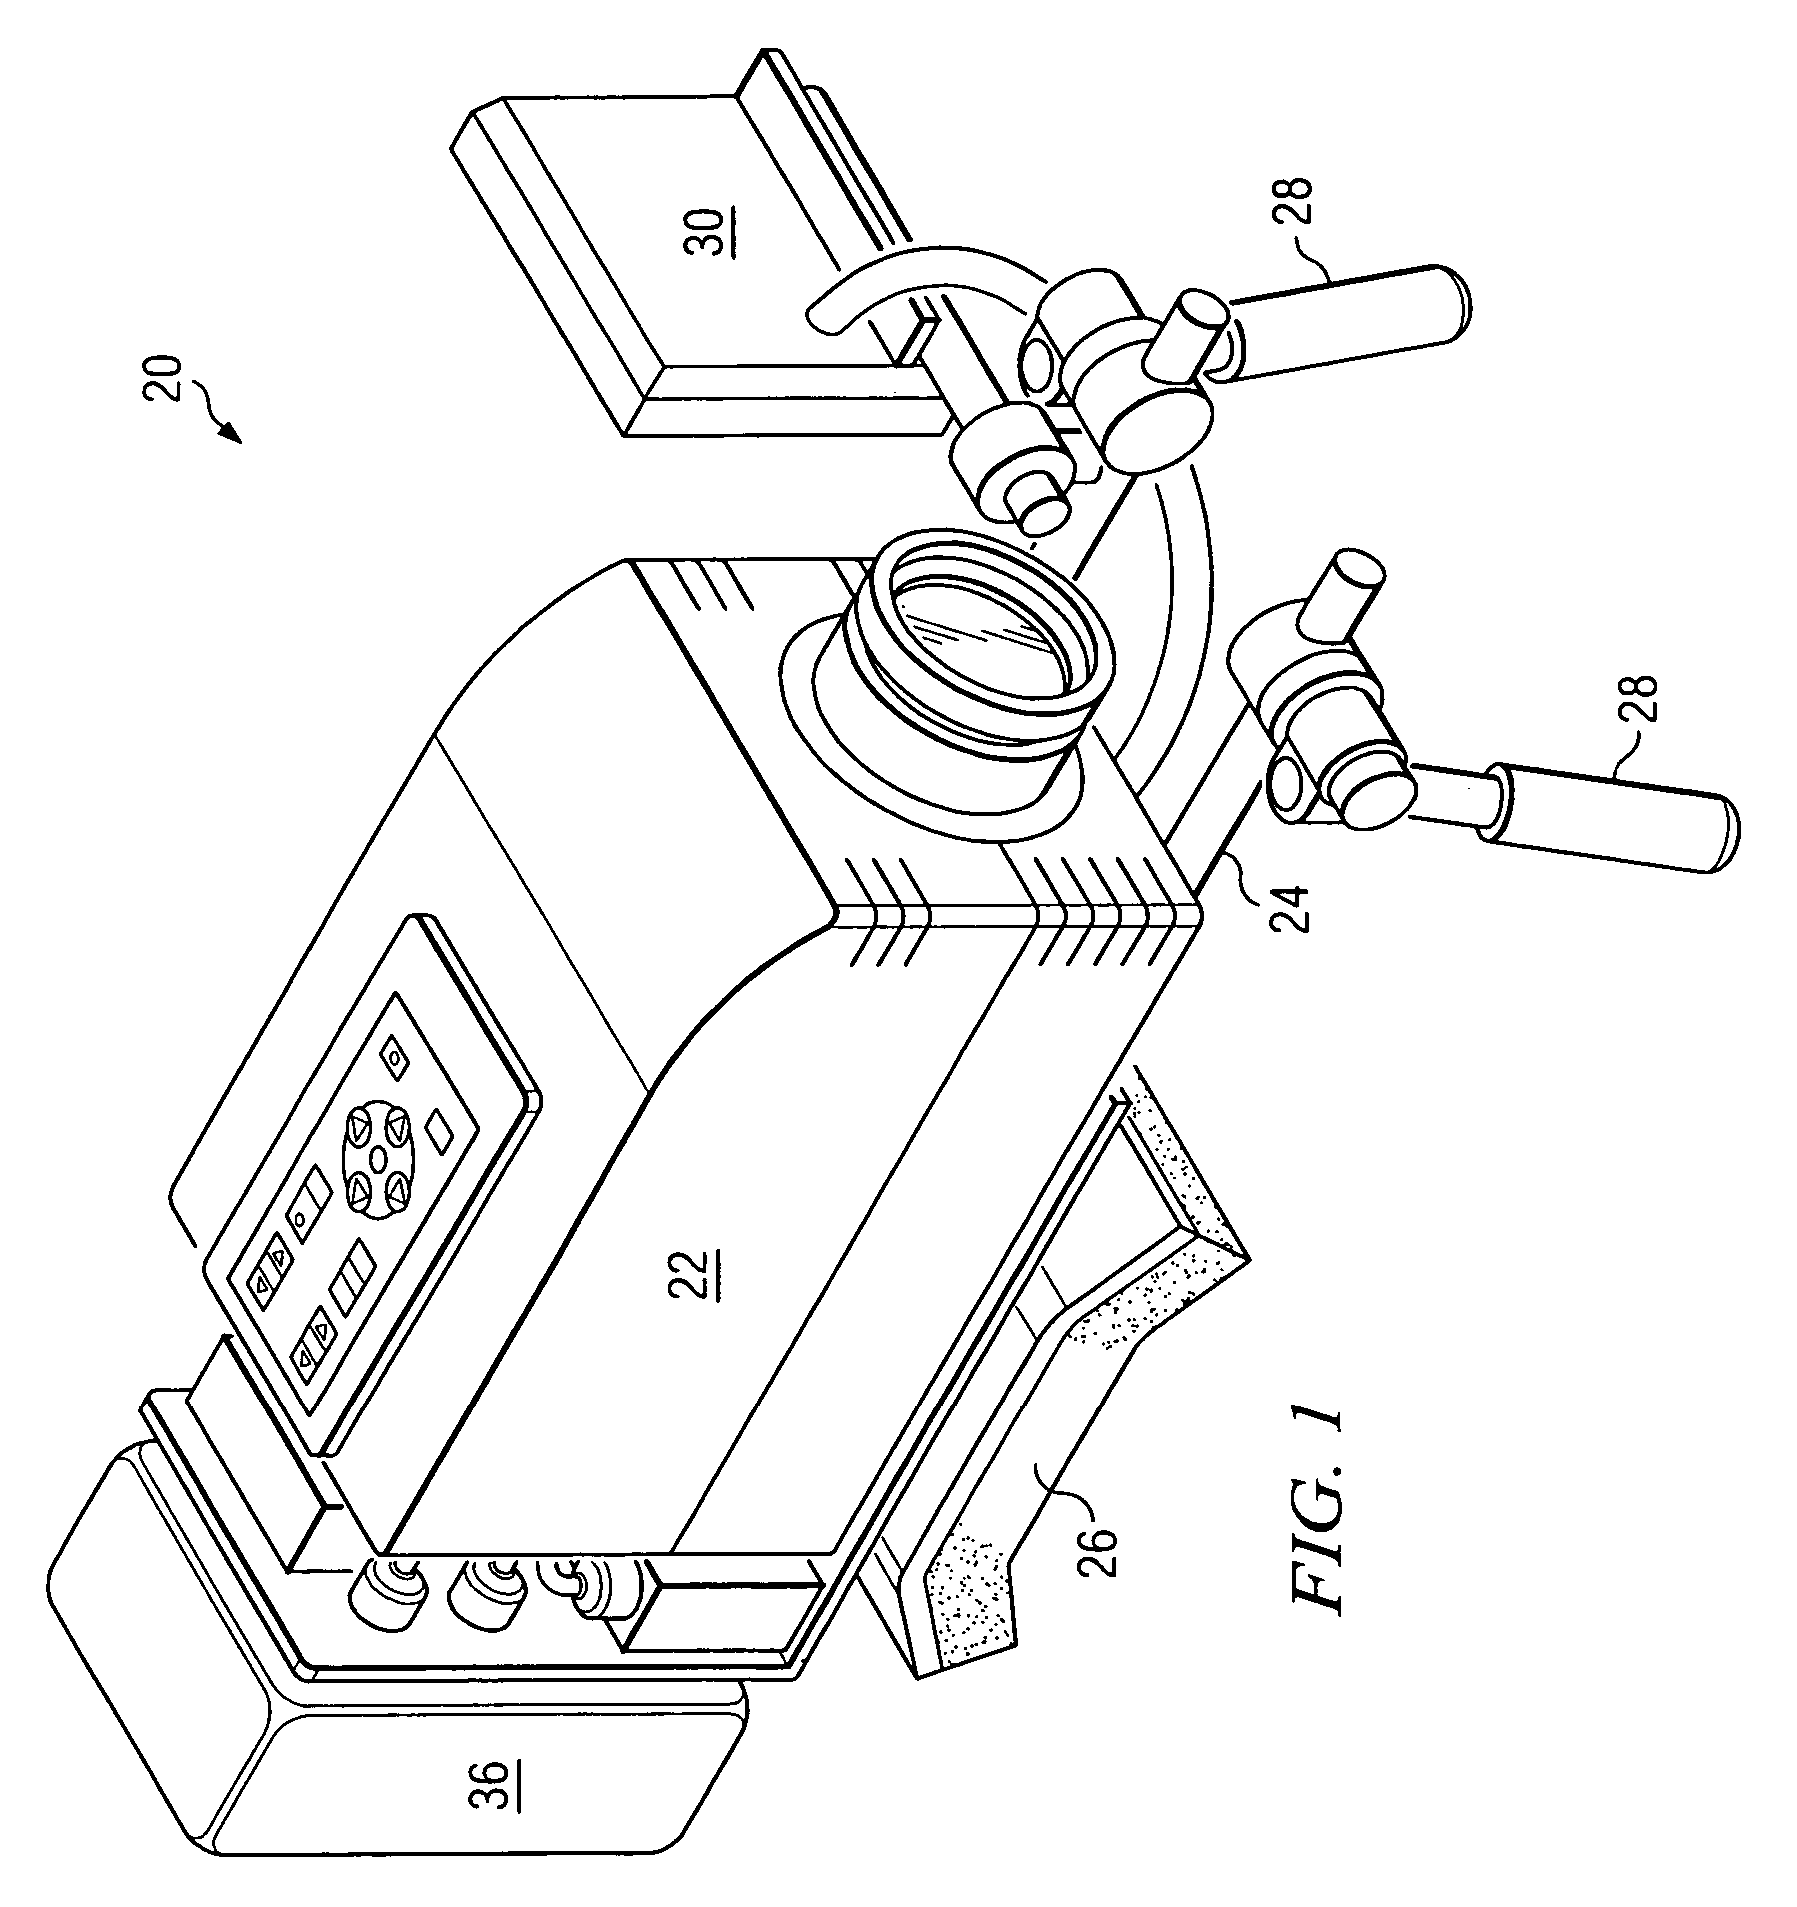 Methods for performing inspections and detecting chemical leaks using an infrared camera system